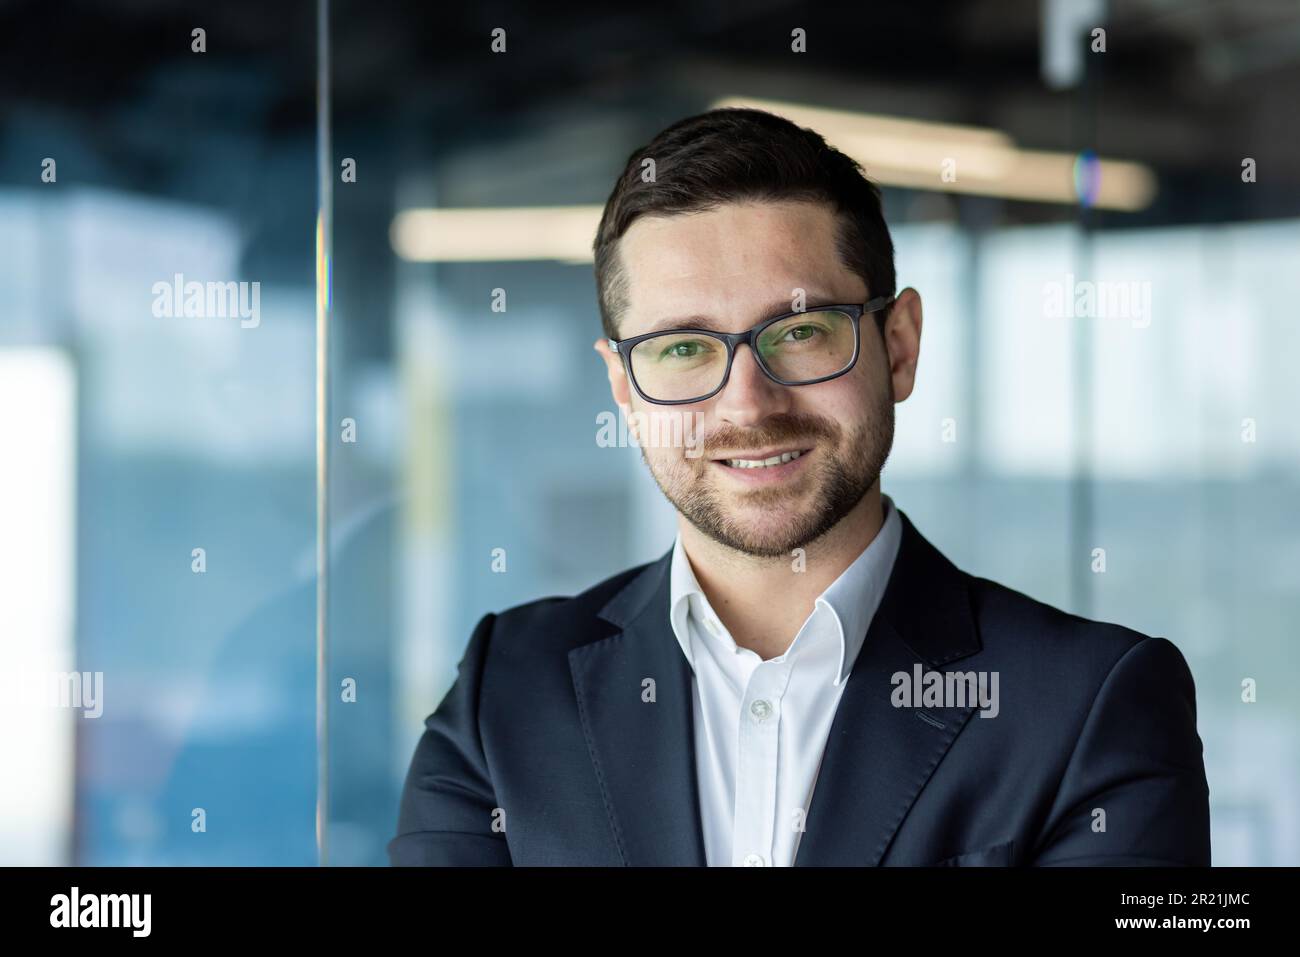 Portrait of a young male accountant, businessman, office worker looking at the camera and smiling. It is located in the office center. Close-up photo. Stock Photo